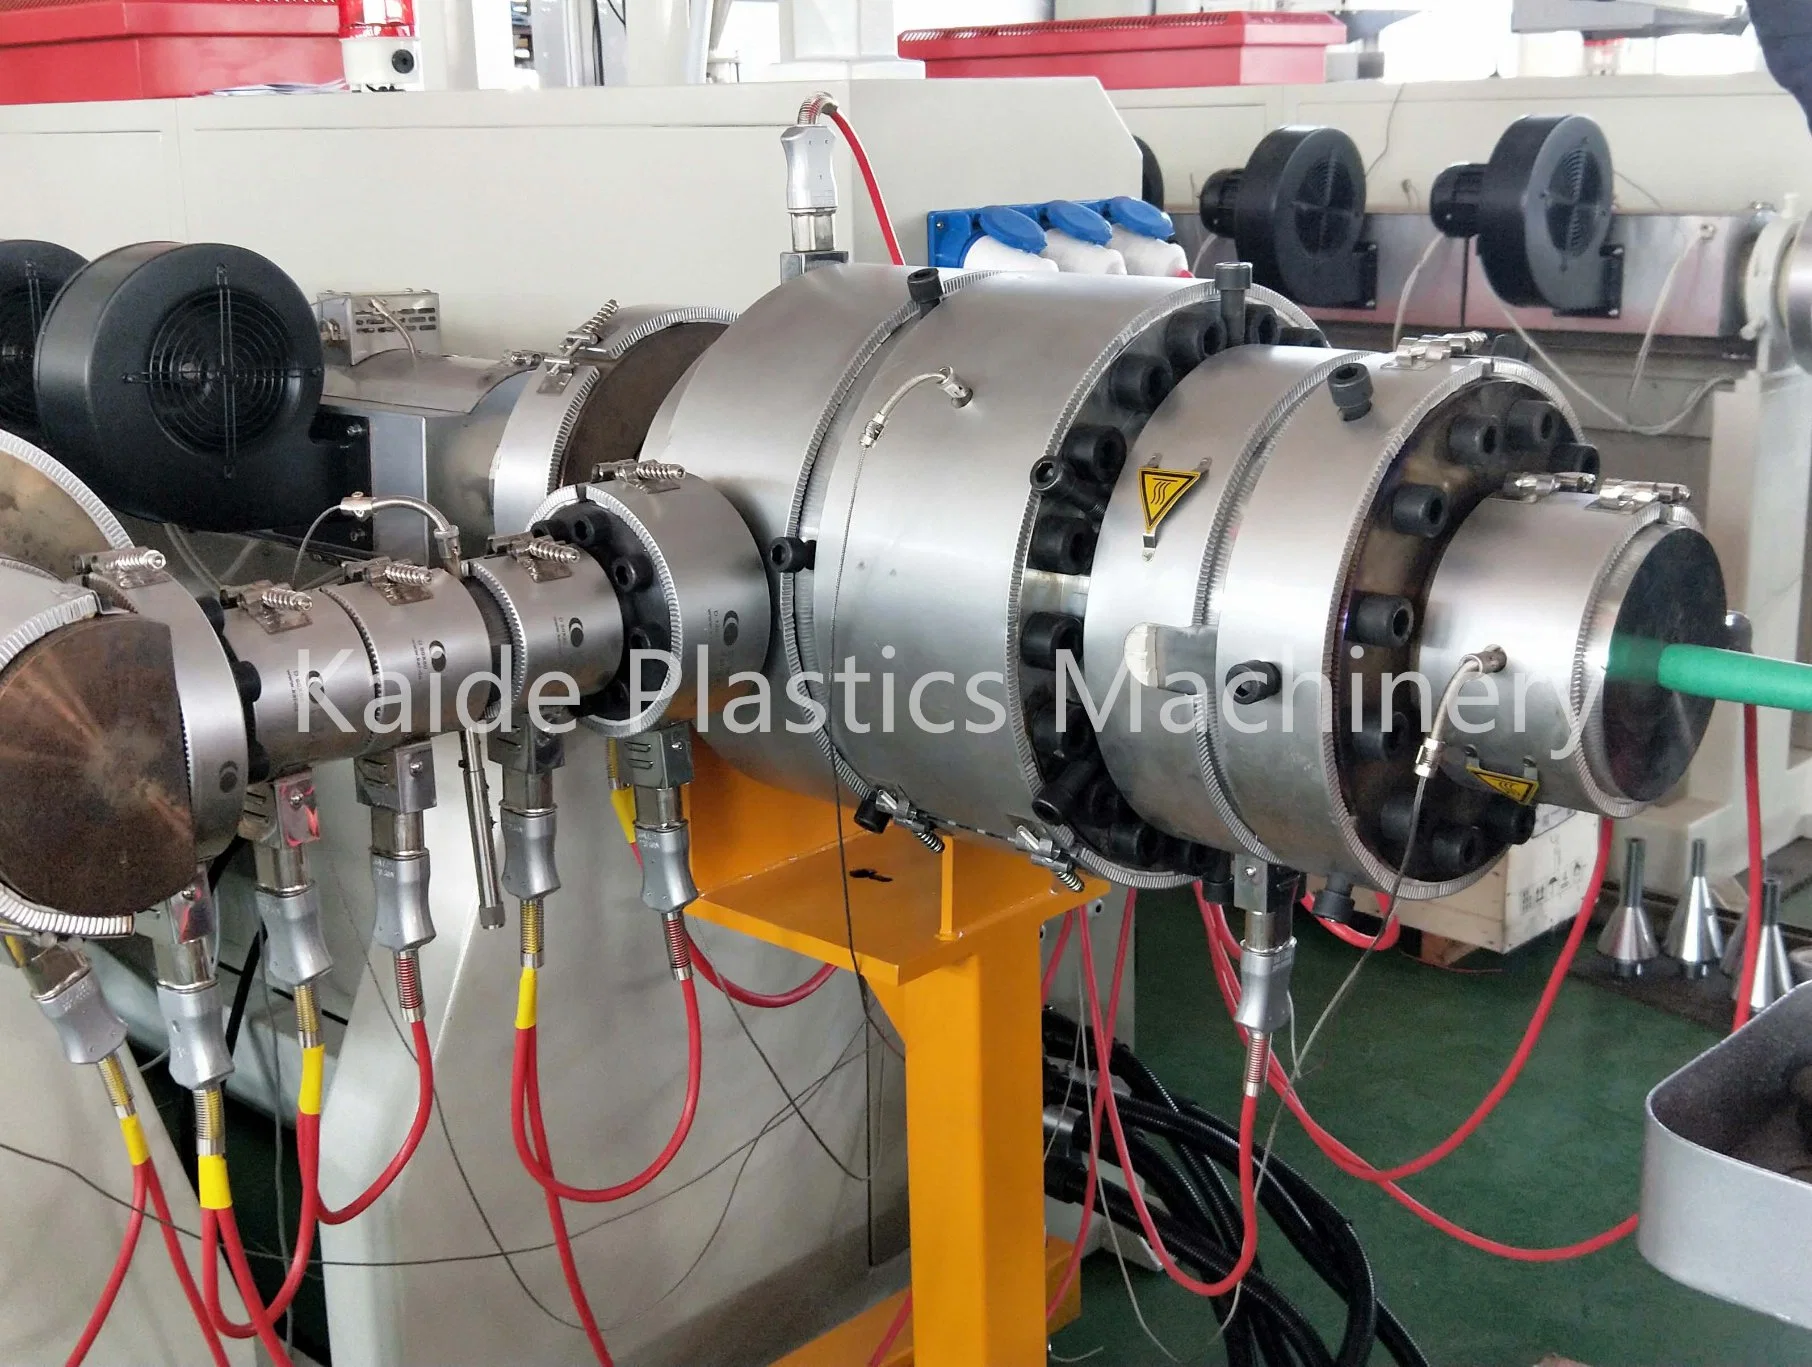 Plastic Deep Screw PPR|Agriculture Water|Gas|Irrigation Pipe|Faux Marble Sheet|Foam Board Floor|Roofing Tile|Extruder|Extrusion Making Machine Production Line